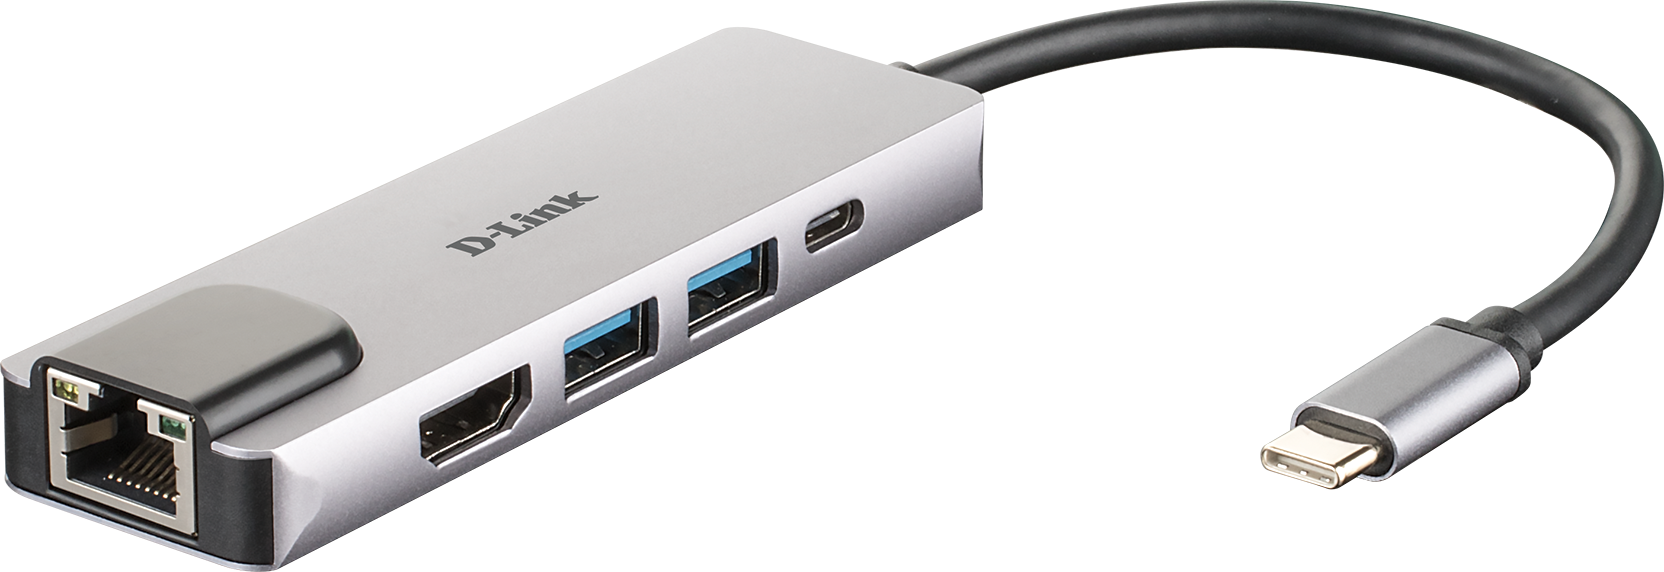 DUB-M520 5-in-1 USB-C Hub with HDMI/Ethernet and Power Delivery - side angle